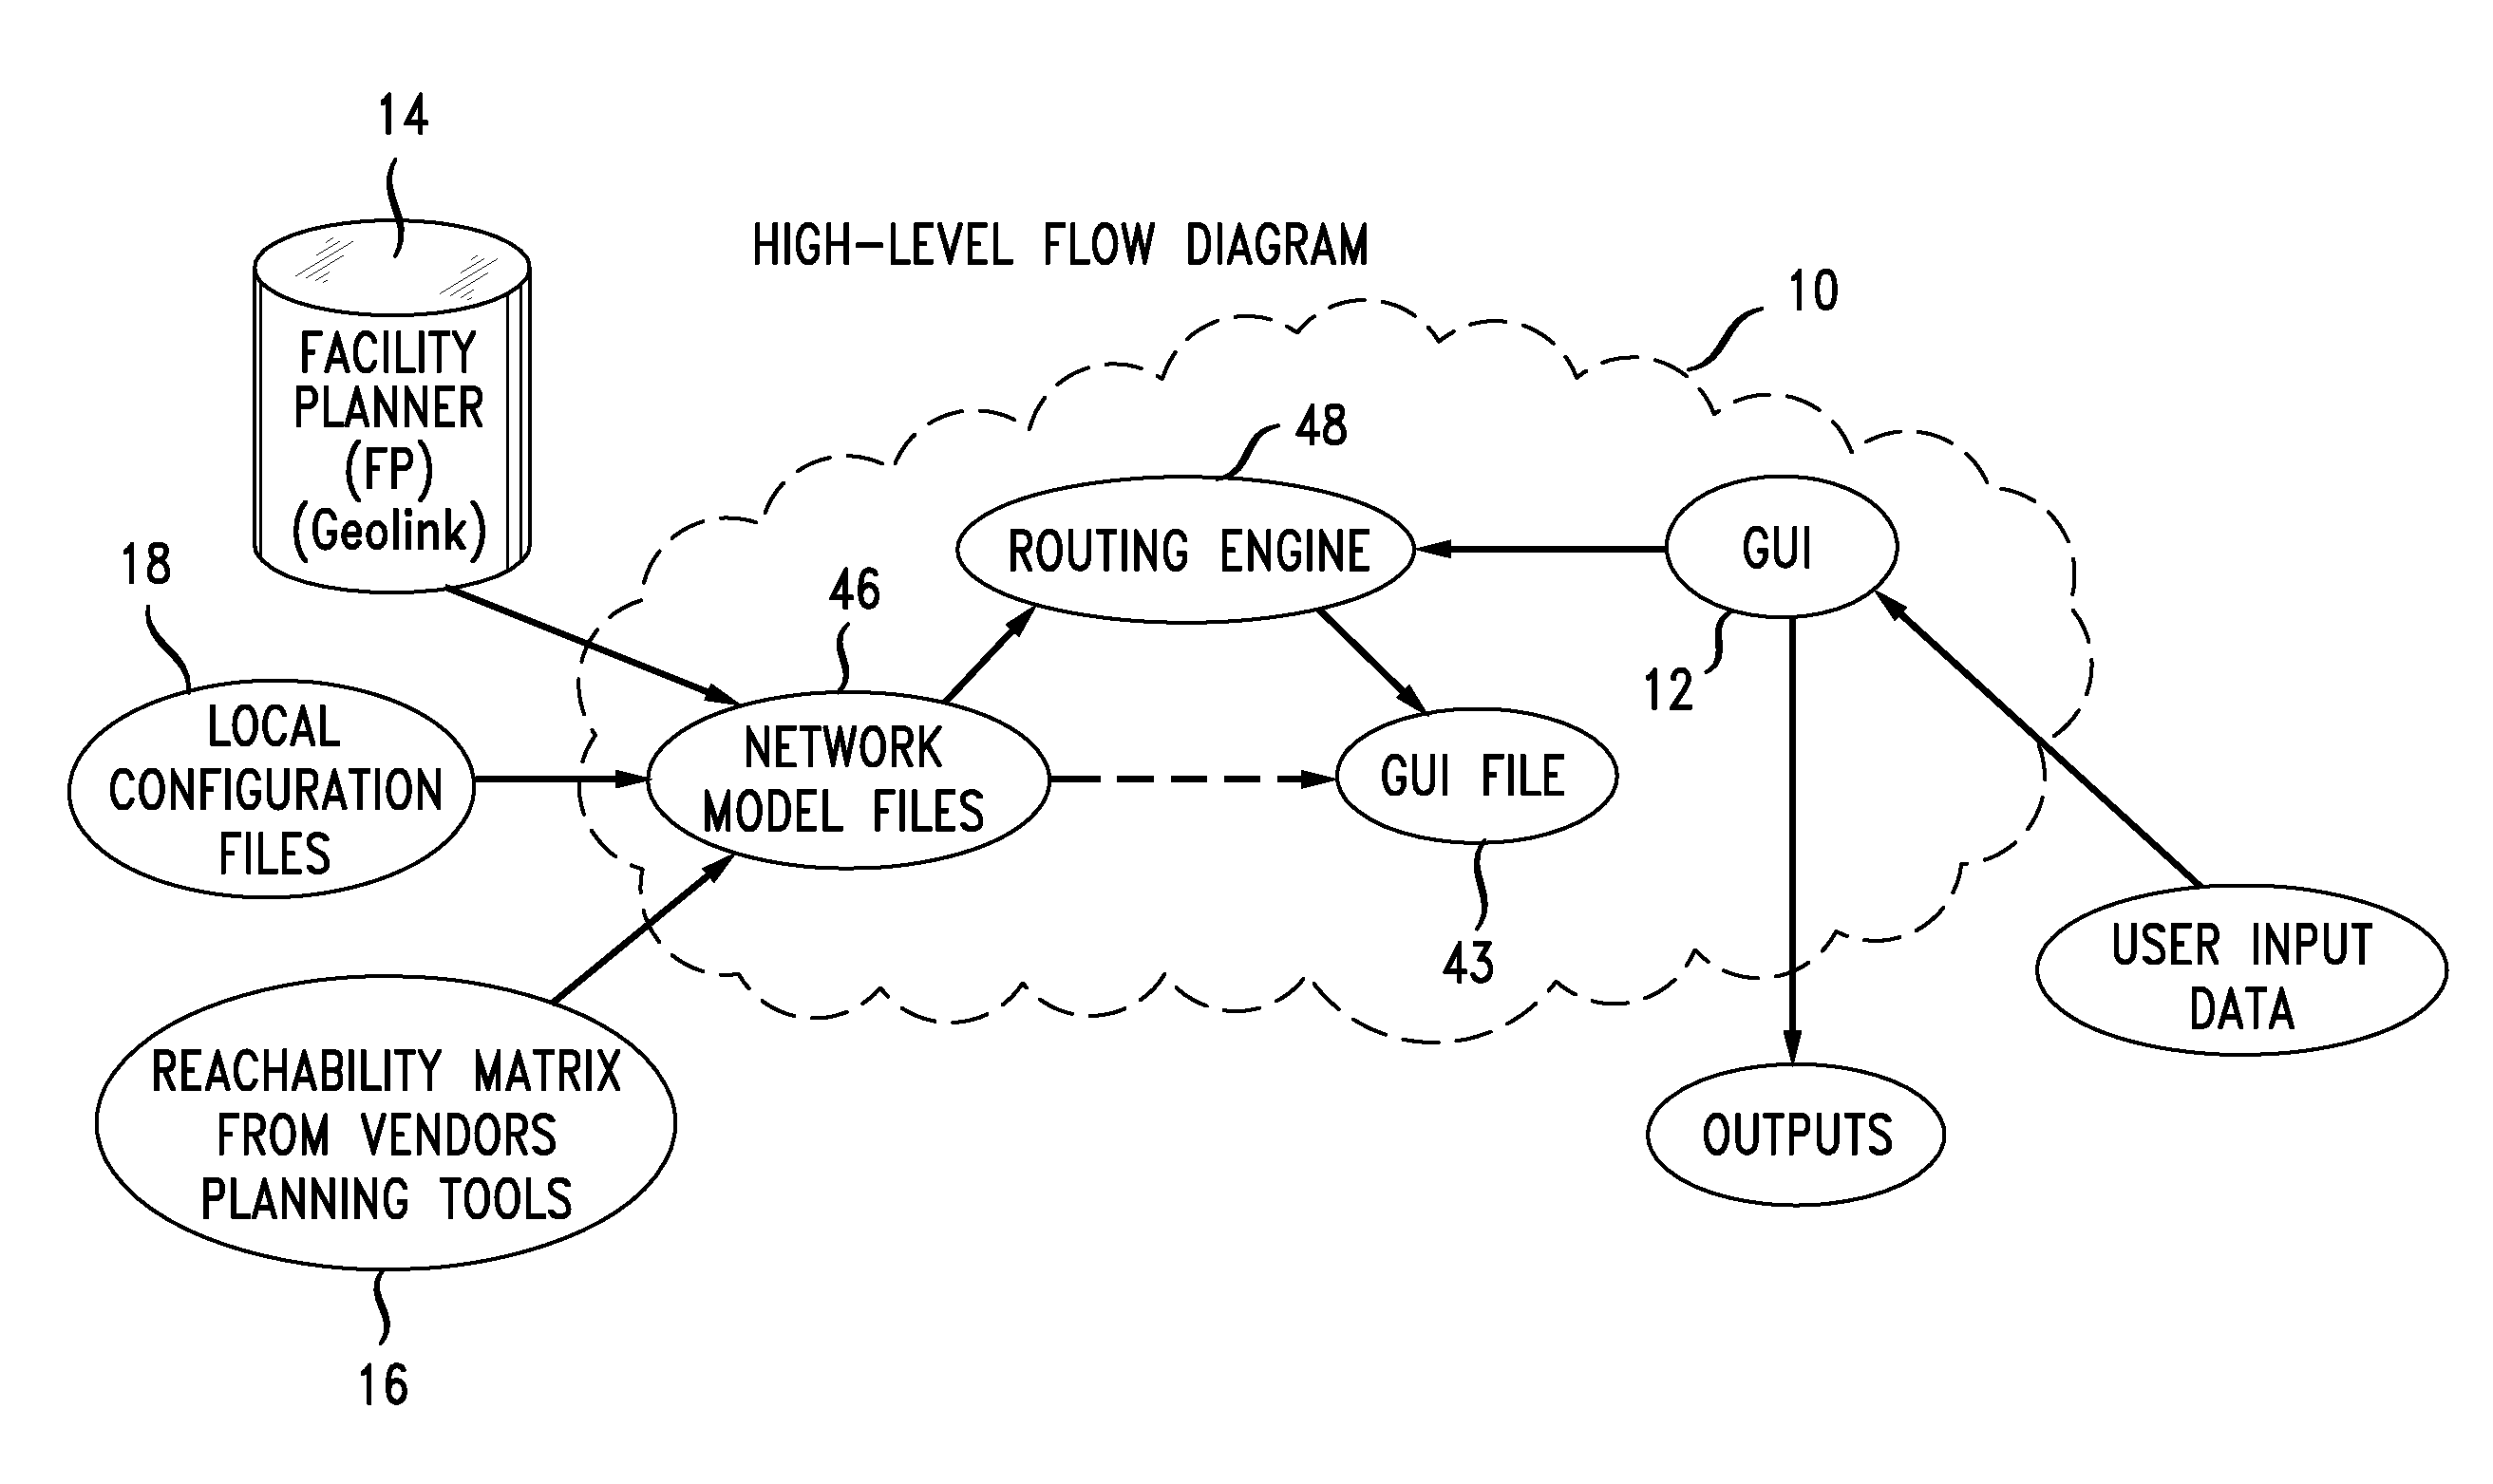 Reachability Matrices Spanning Multiple Domains in an Optical Network